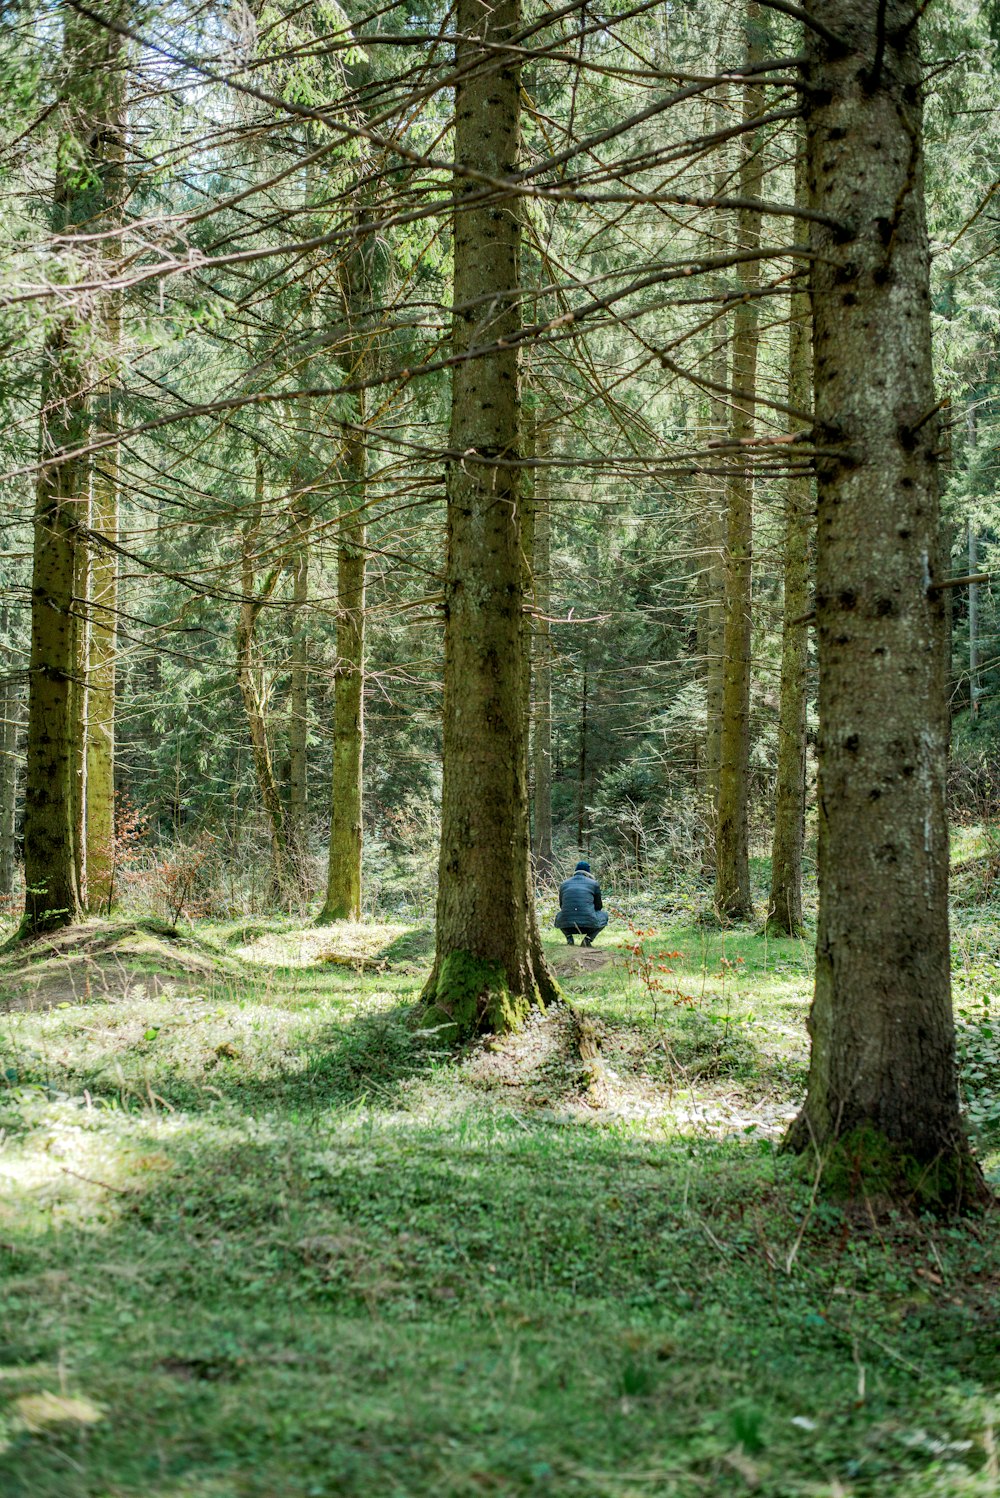 a person walking through a forest with lots of trees